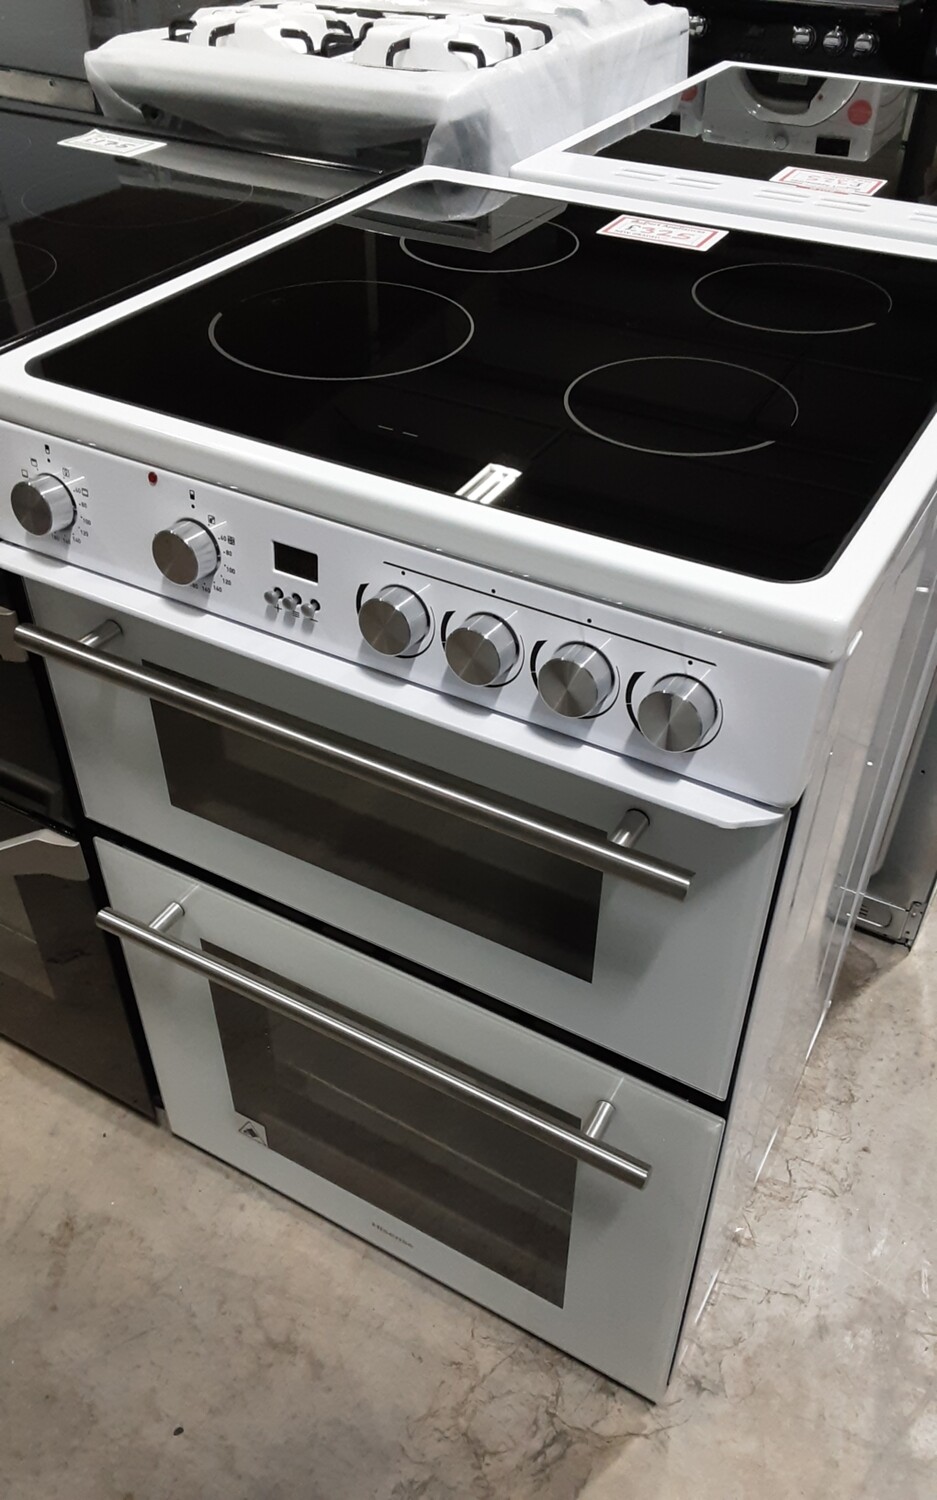 Hisense HDE3211BWUK 60cm Electric Cooker with Ceramic Hob - White - A/A Rated - New Graded 12 Month Guarantee 